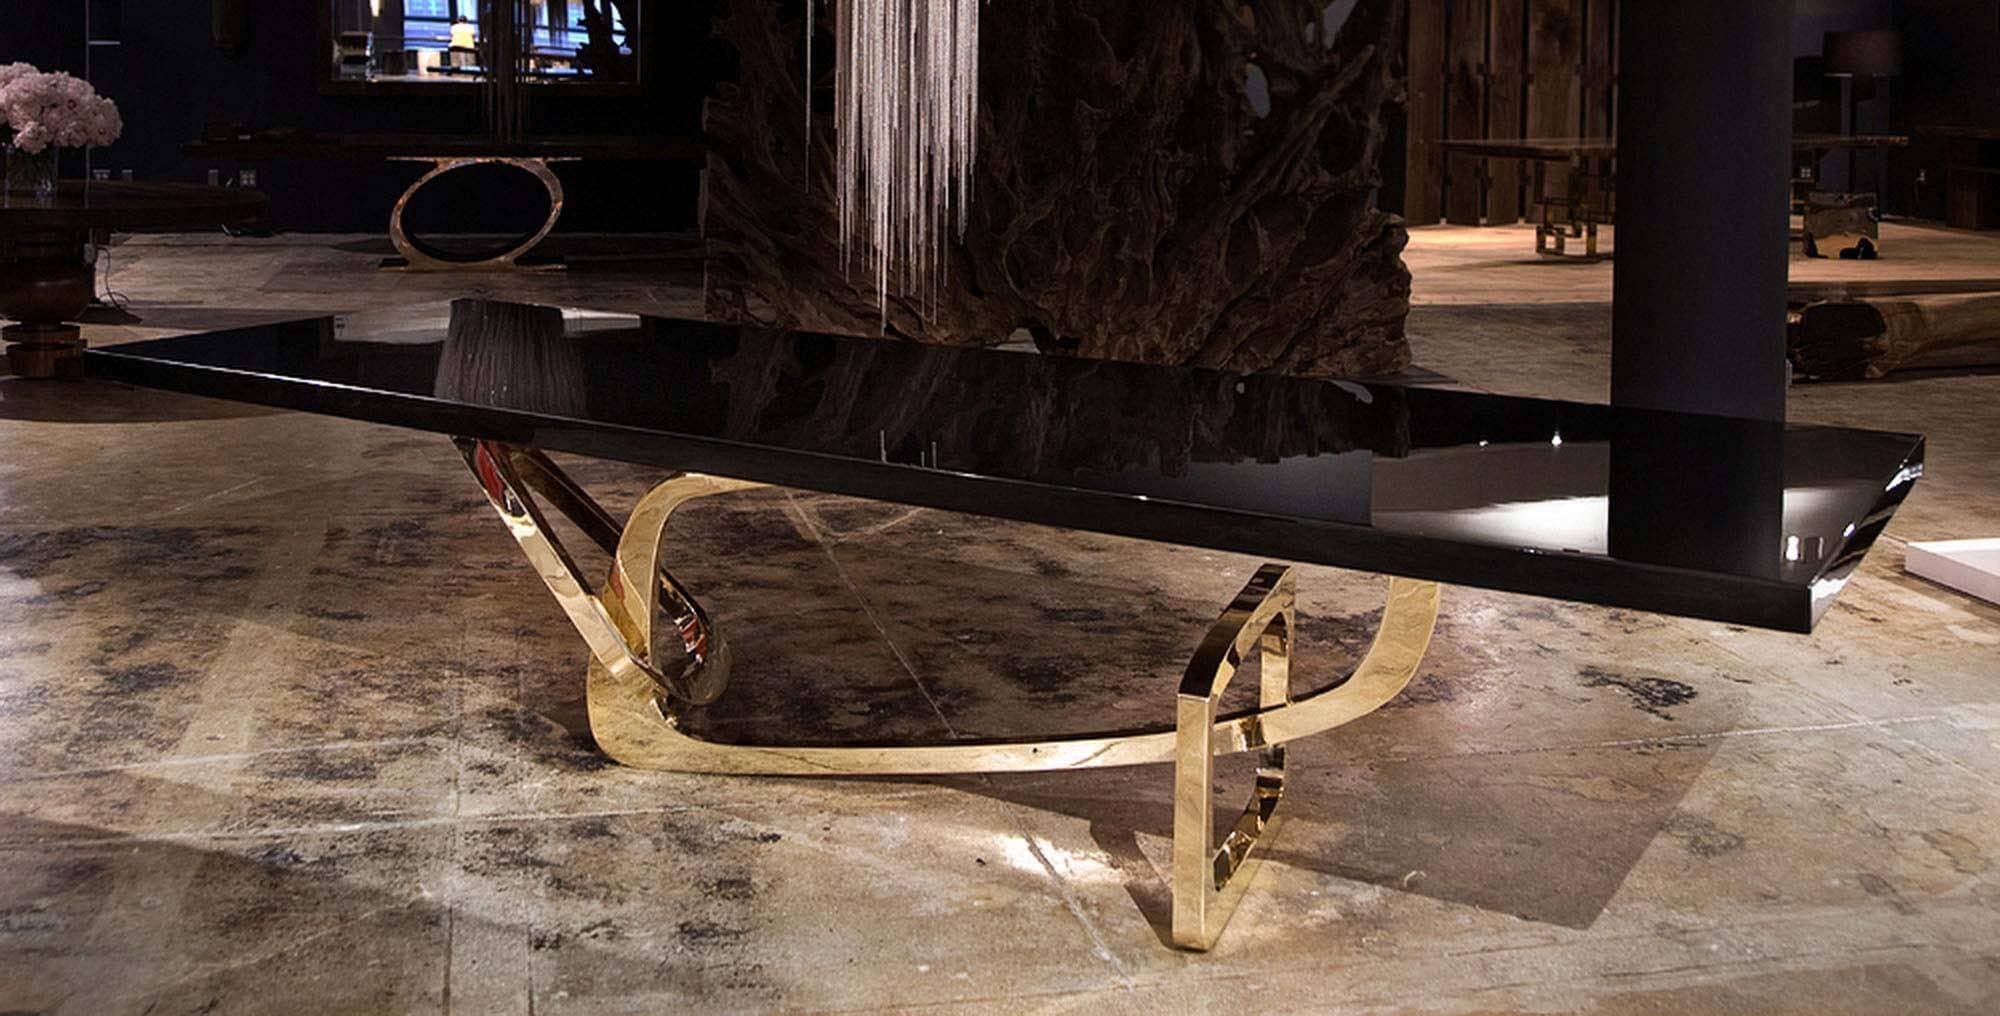 The Bangle dining table by Barlas Baylar is a contemporary interpretation of Art Deco design inspiration by utilizing rigorous craft.  The sculptural Bronze or Stainless Steel base is available in a variety of finishes.  The top can be created using